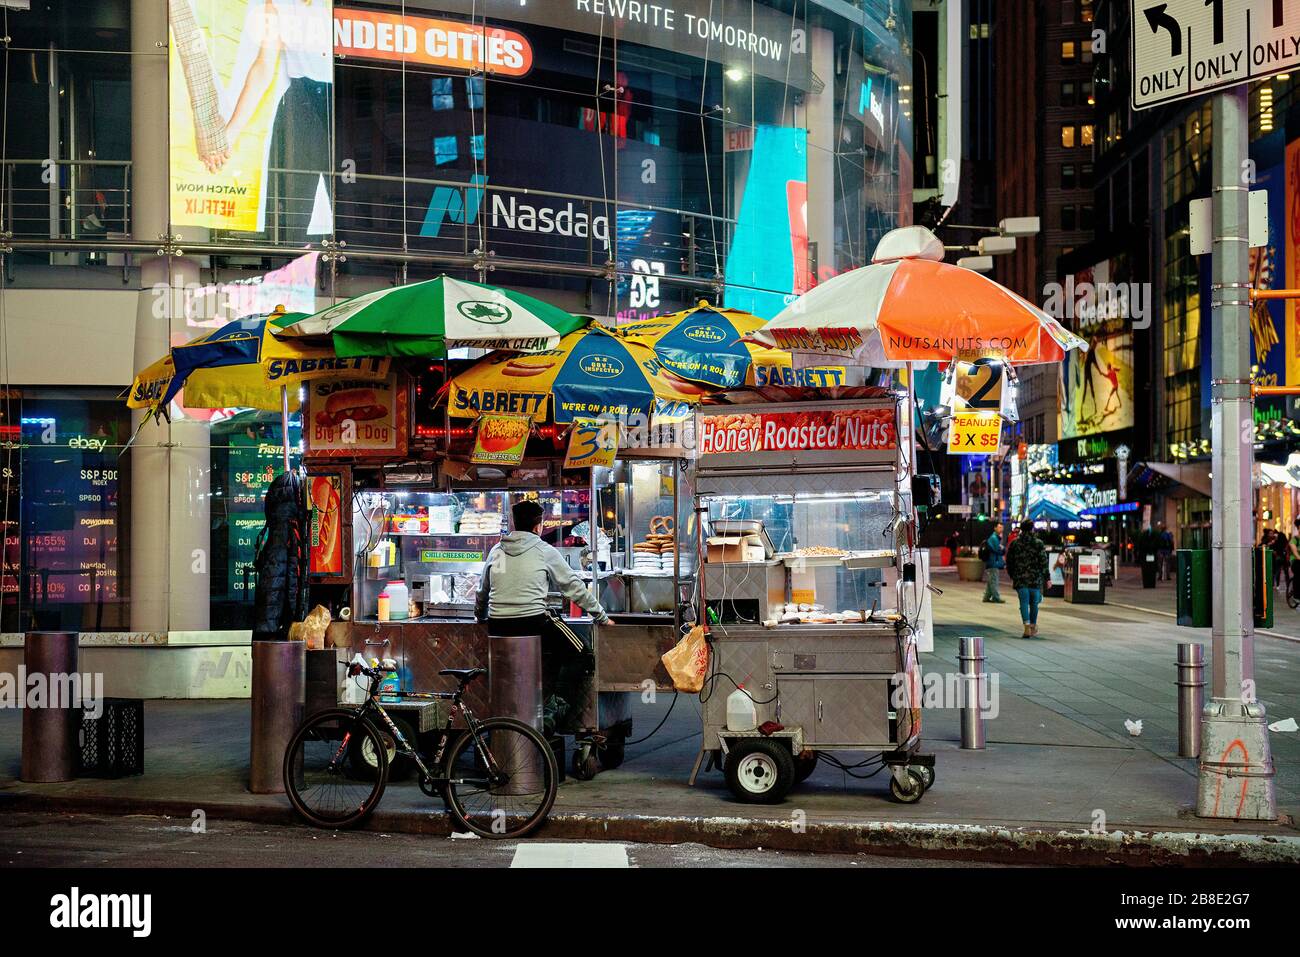 A street vendor in a deserted Times Square during rush hour and the Covid-19 Pandemic in New York City, NY. Stock Photo